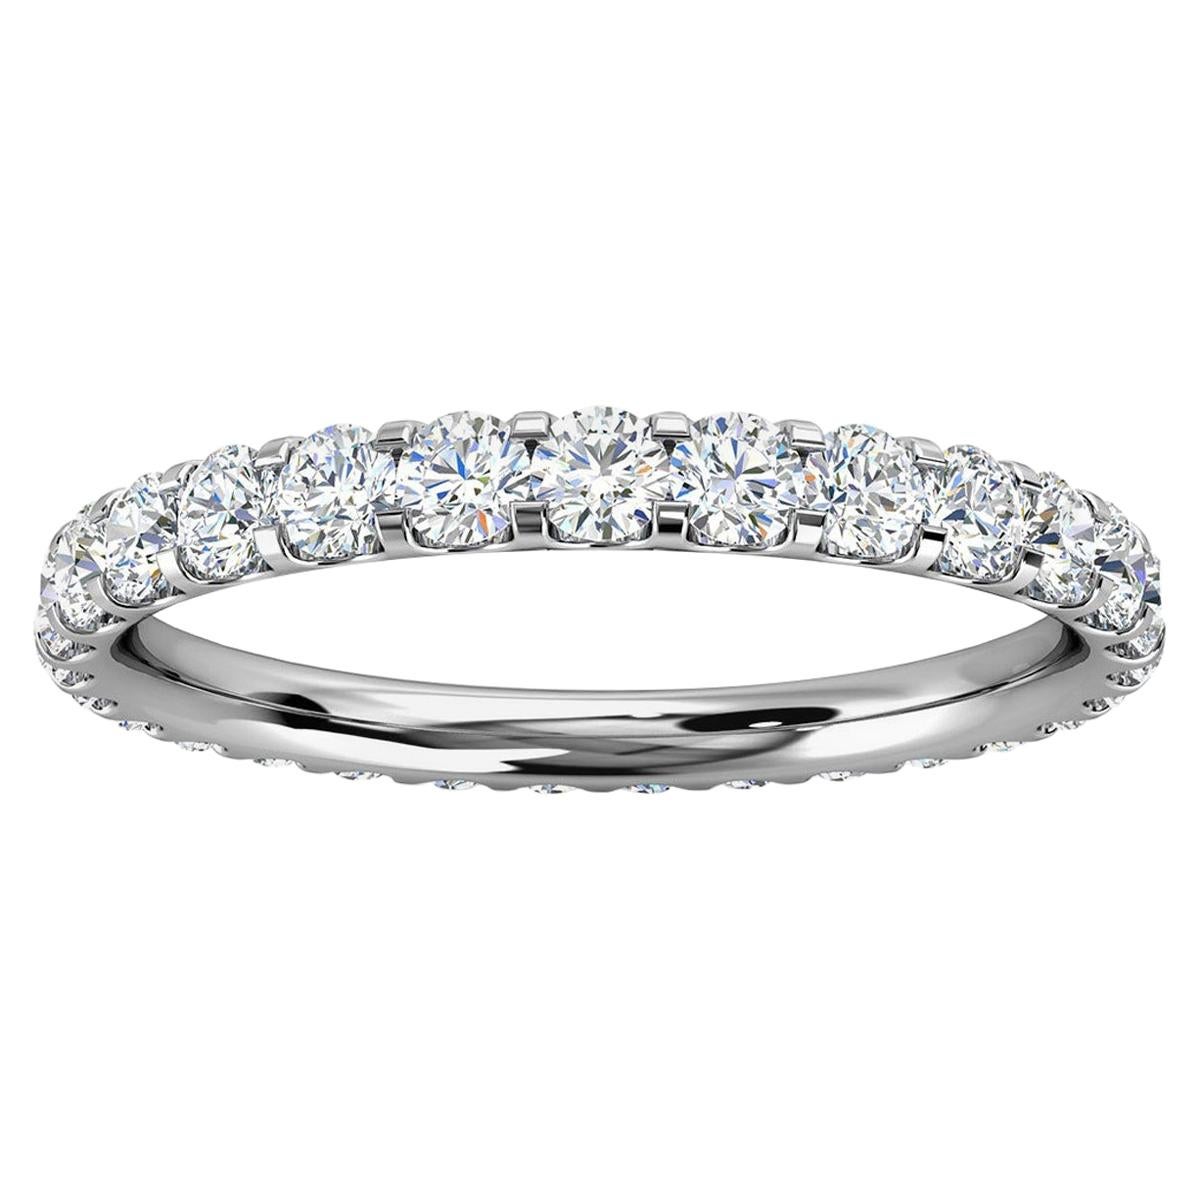 For Sale:  14K White Gold Viola Eternity Micro-Prong Diamond Ring '3/4 Ct. tw'